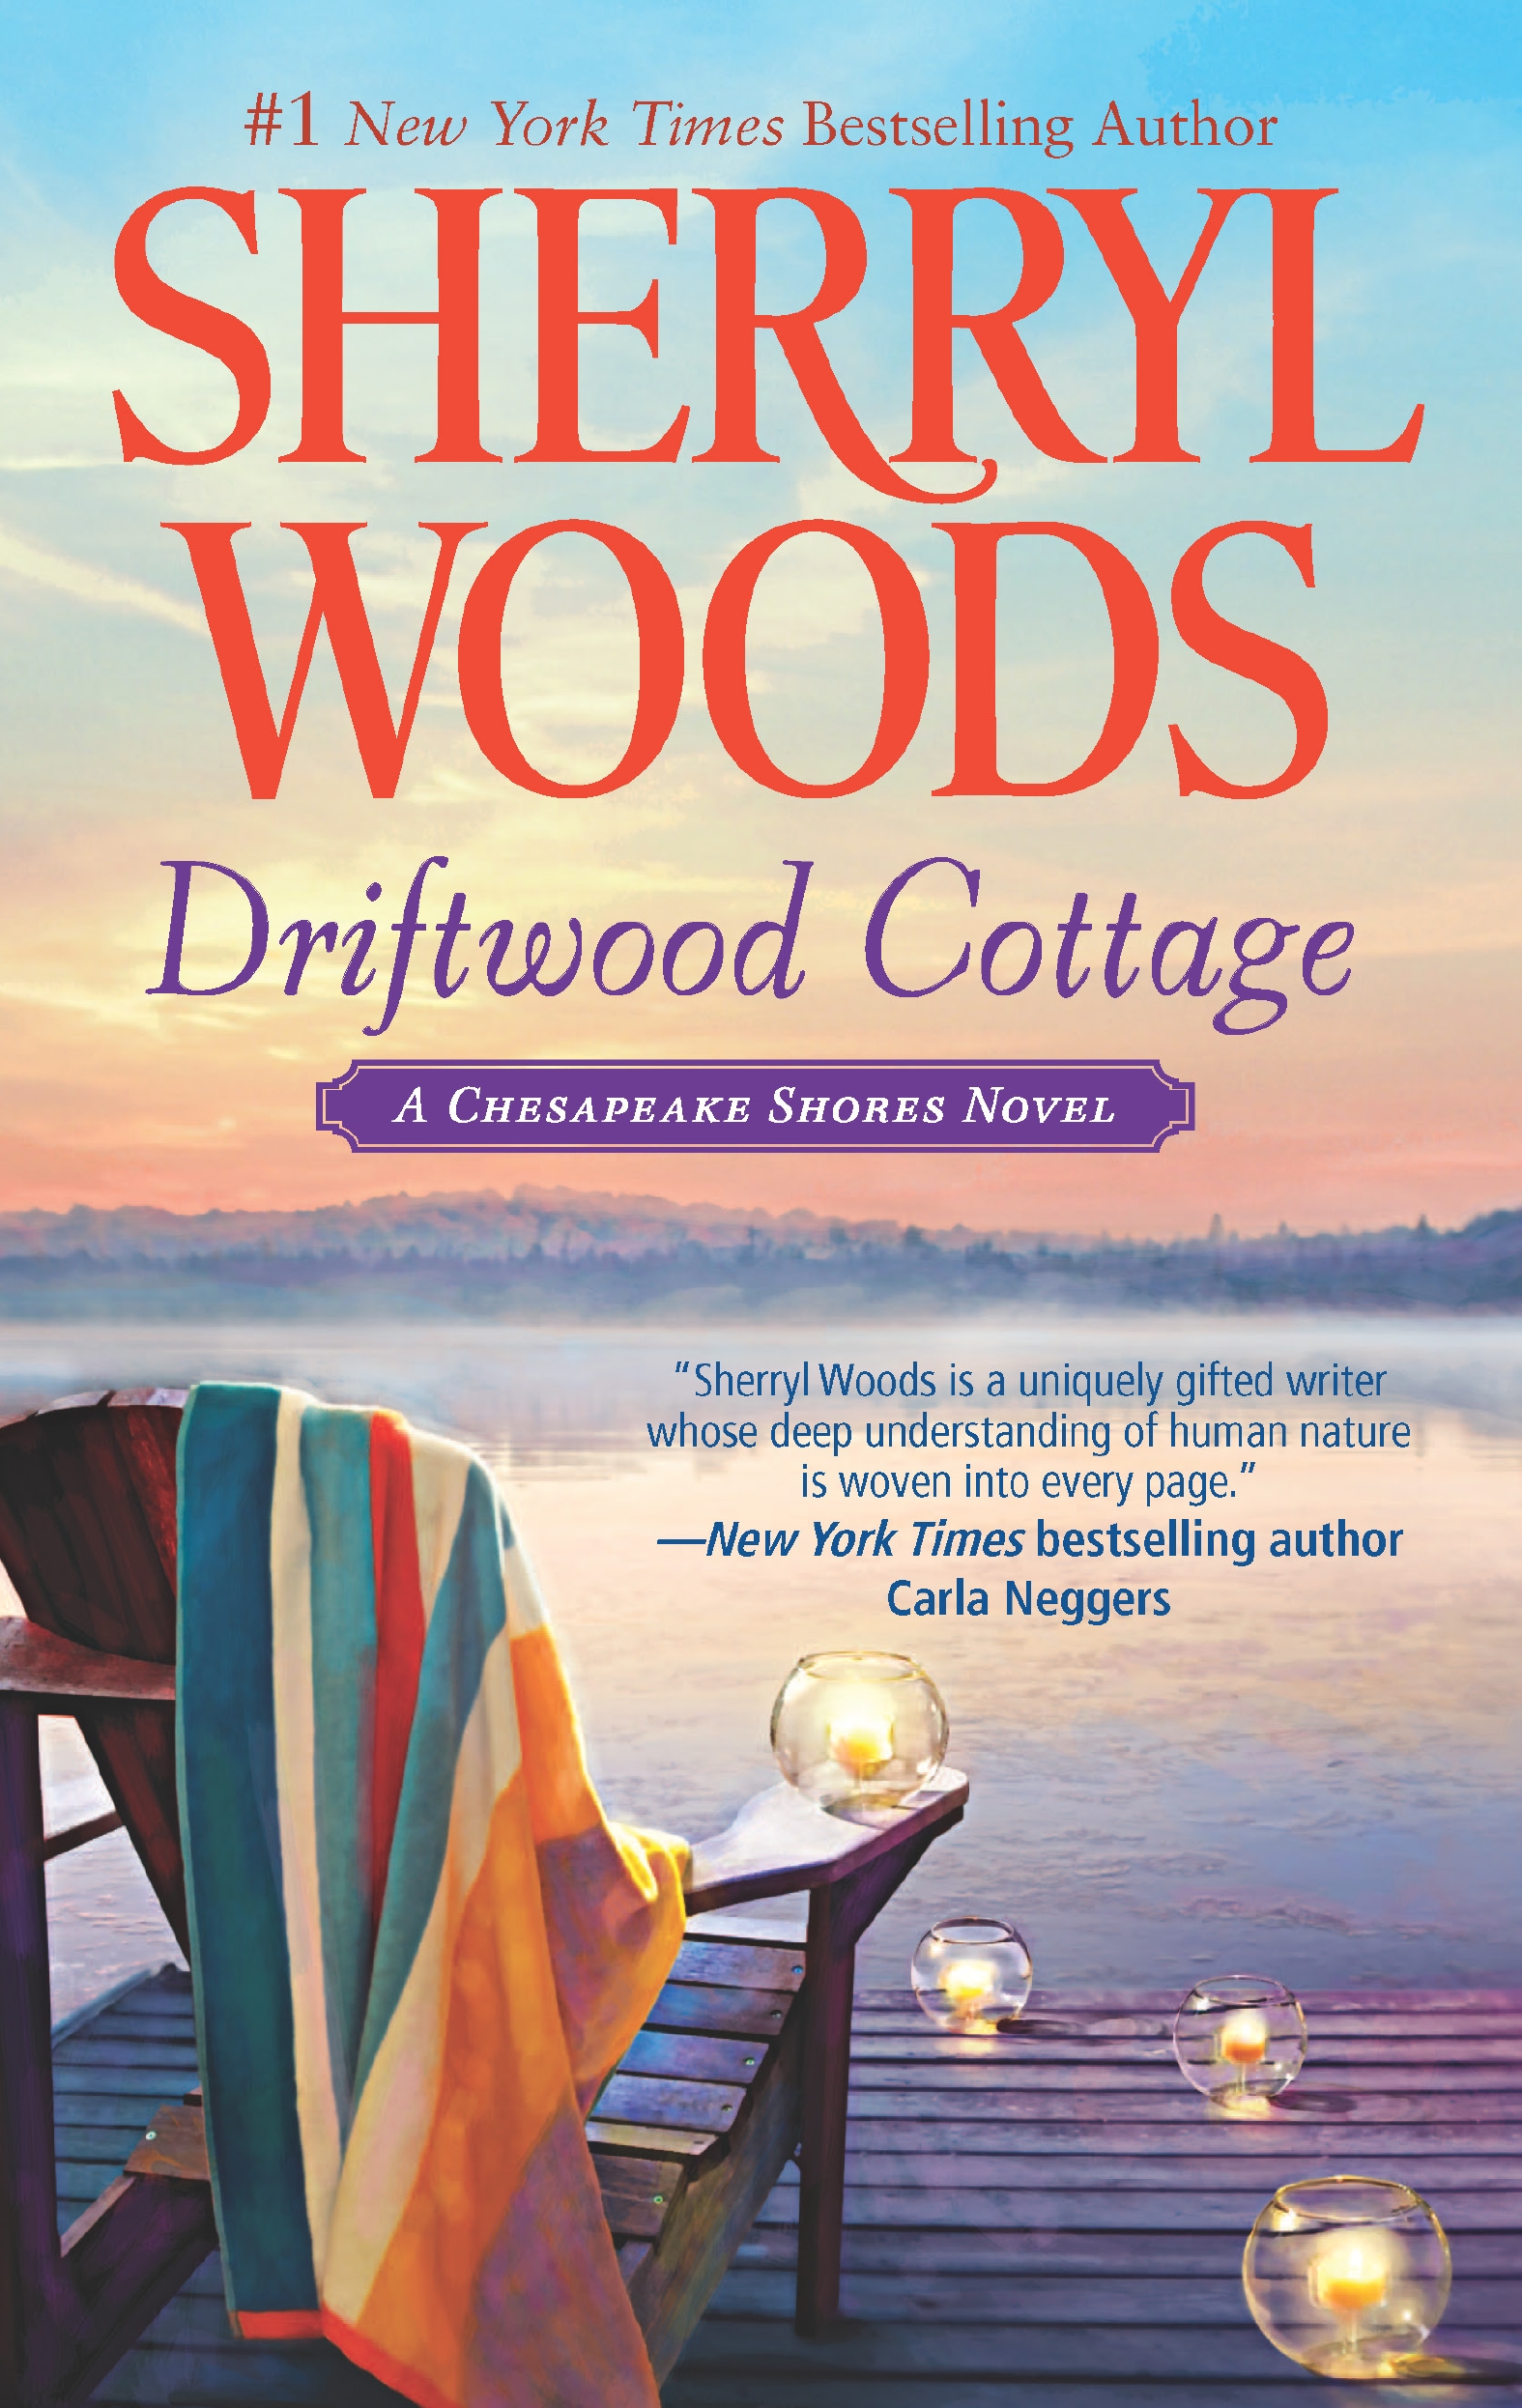 Driftwood cottage cover image